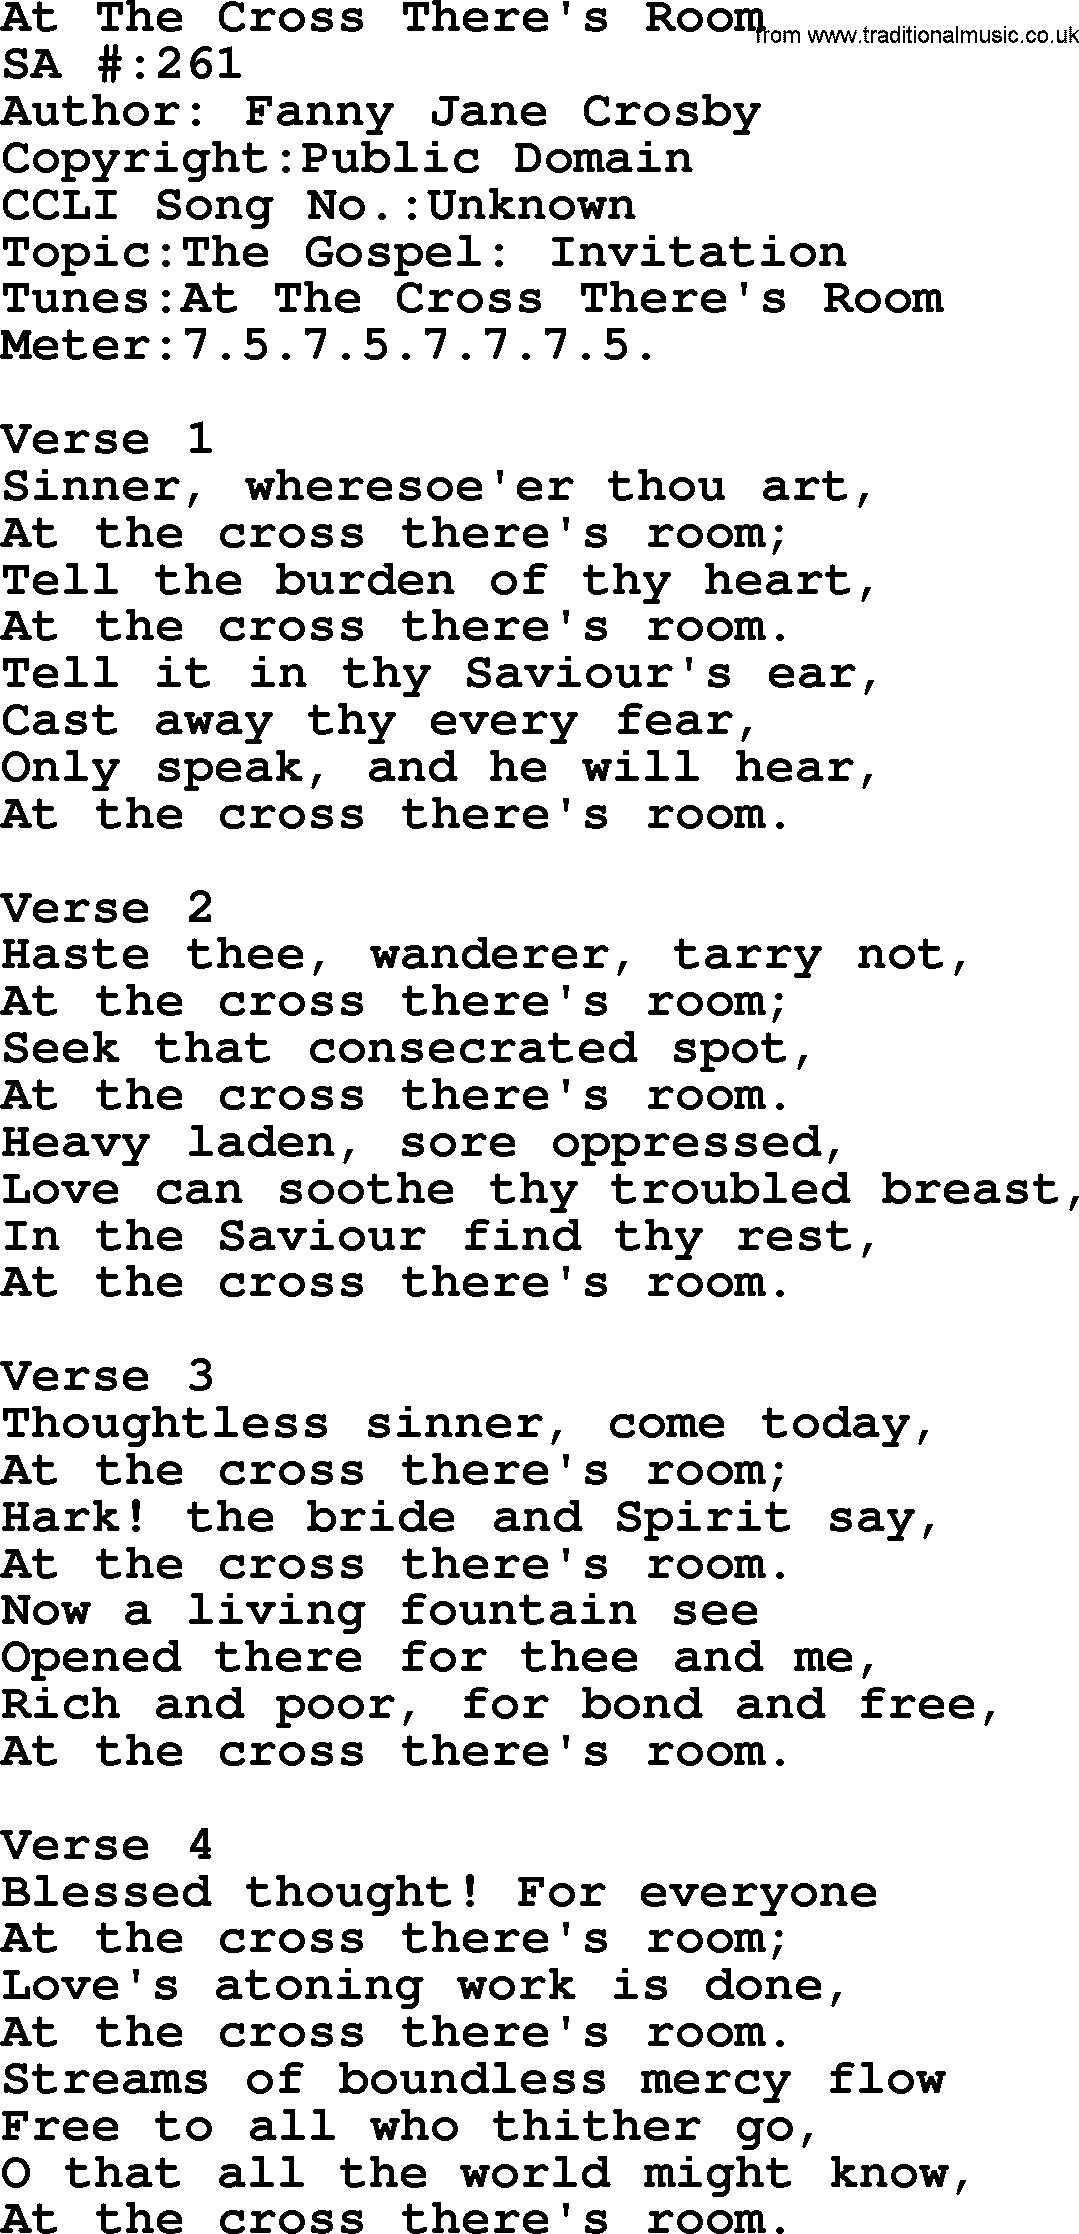 Salvation Army Hymnal, title: At The Cross There's Room, with lyrics and PDF,